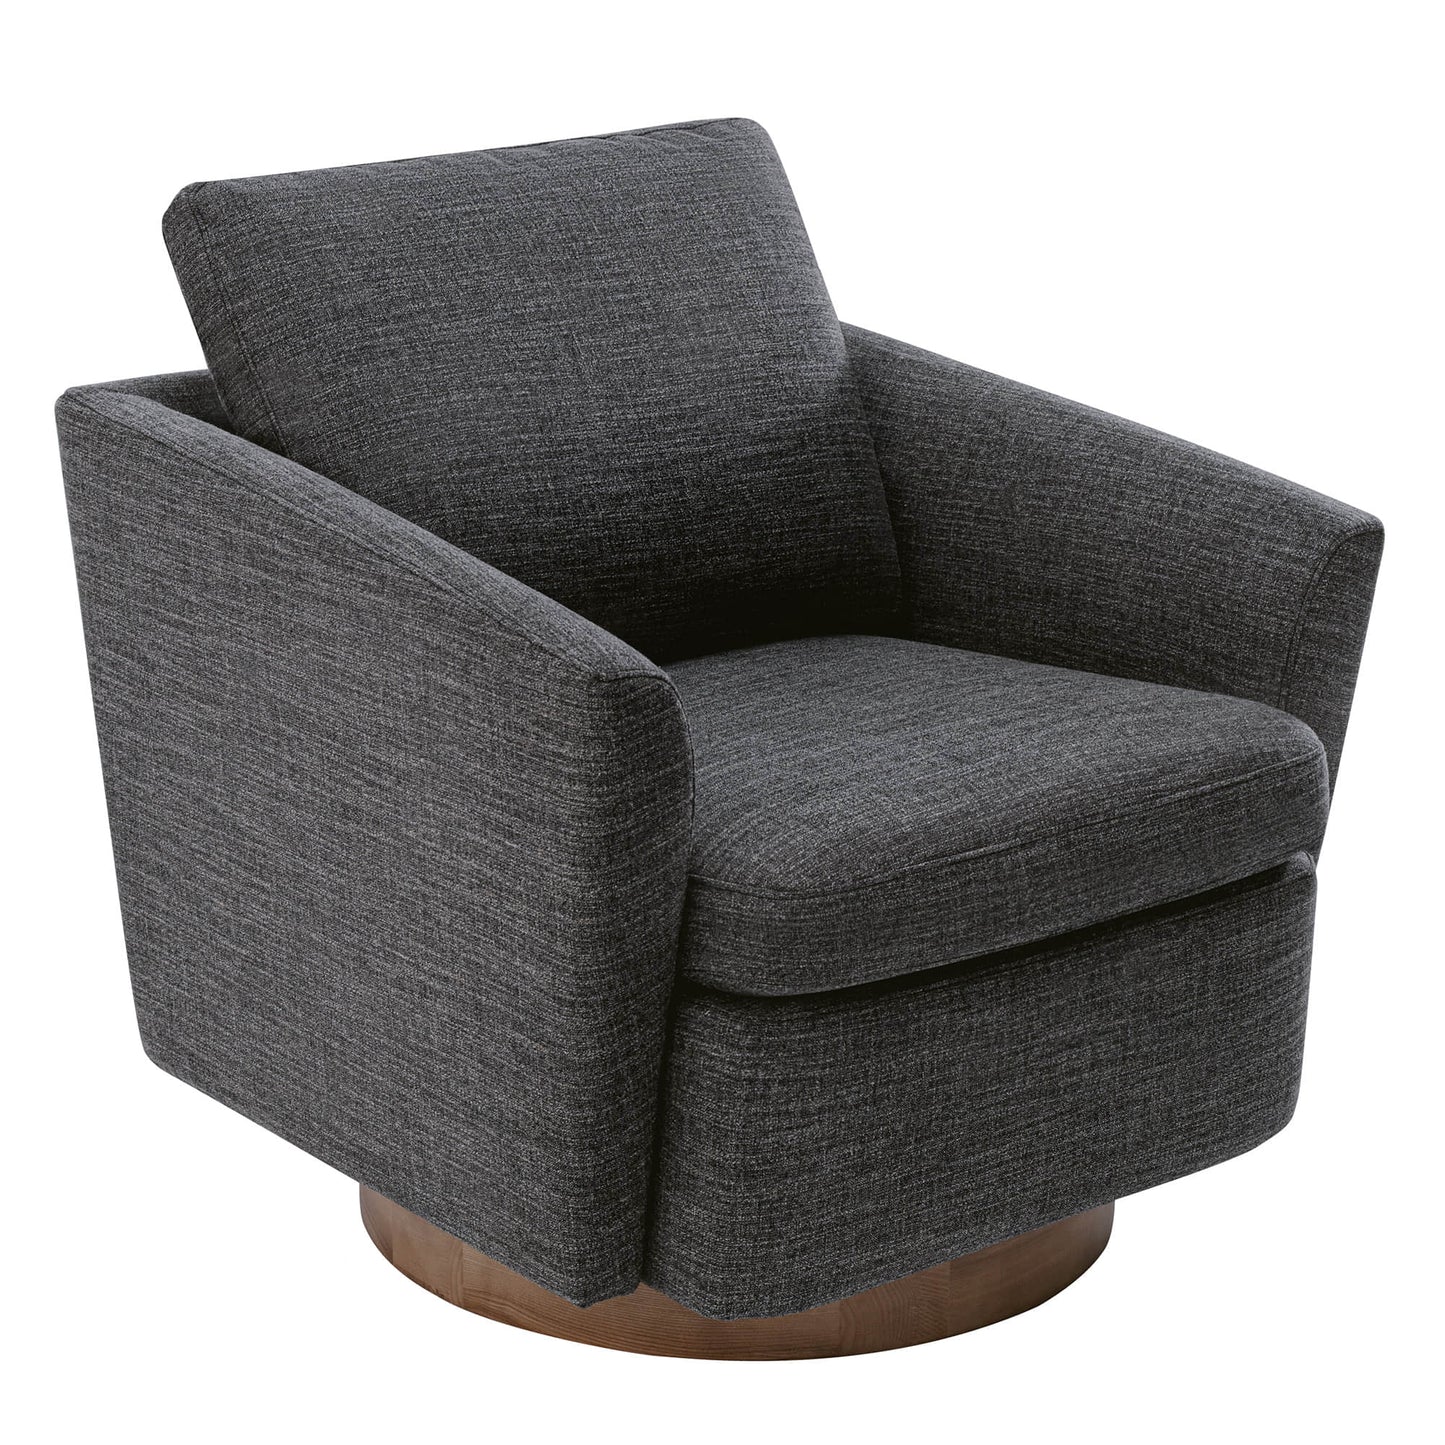 CHITA LIVING-Donella Modern Swivel Accent Chairs-Accent Chair-Fabric-Quarry Gray-